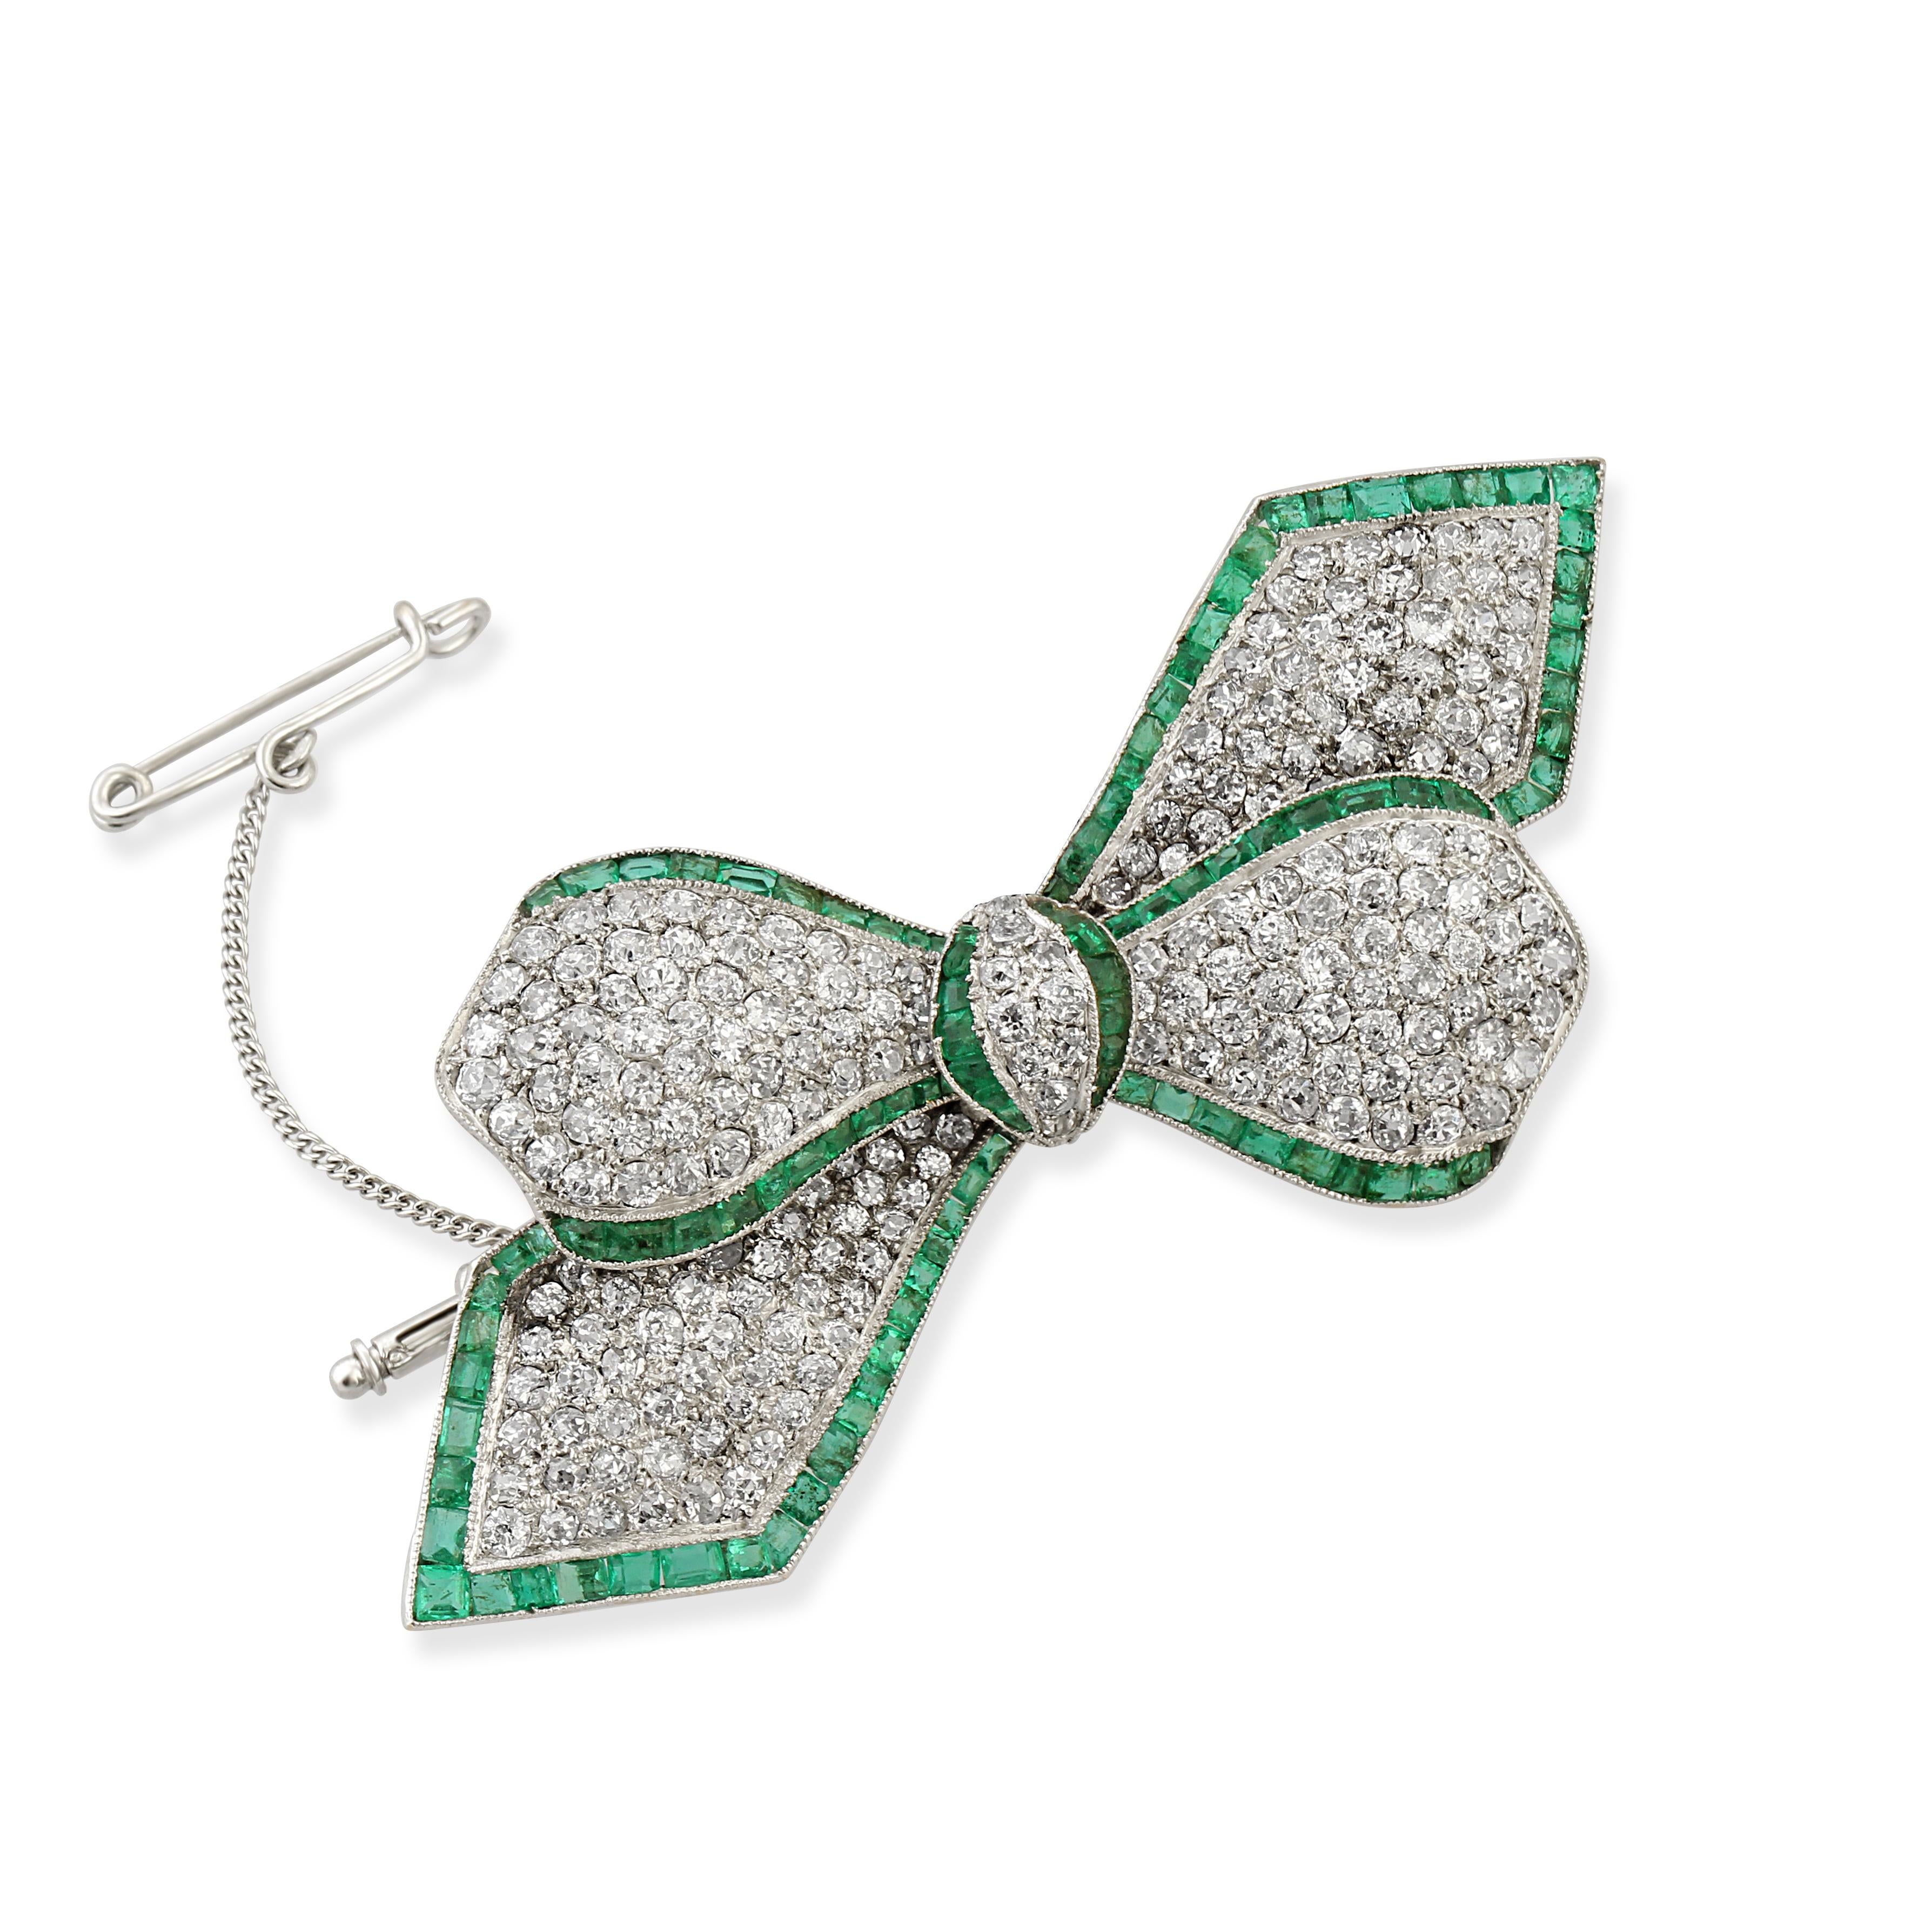 An 18k white gold emerald and diamond bow brooch. Pavé set with diamonds and a rim of calibre-cut emeralds.
